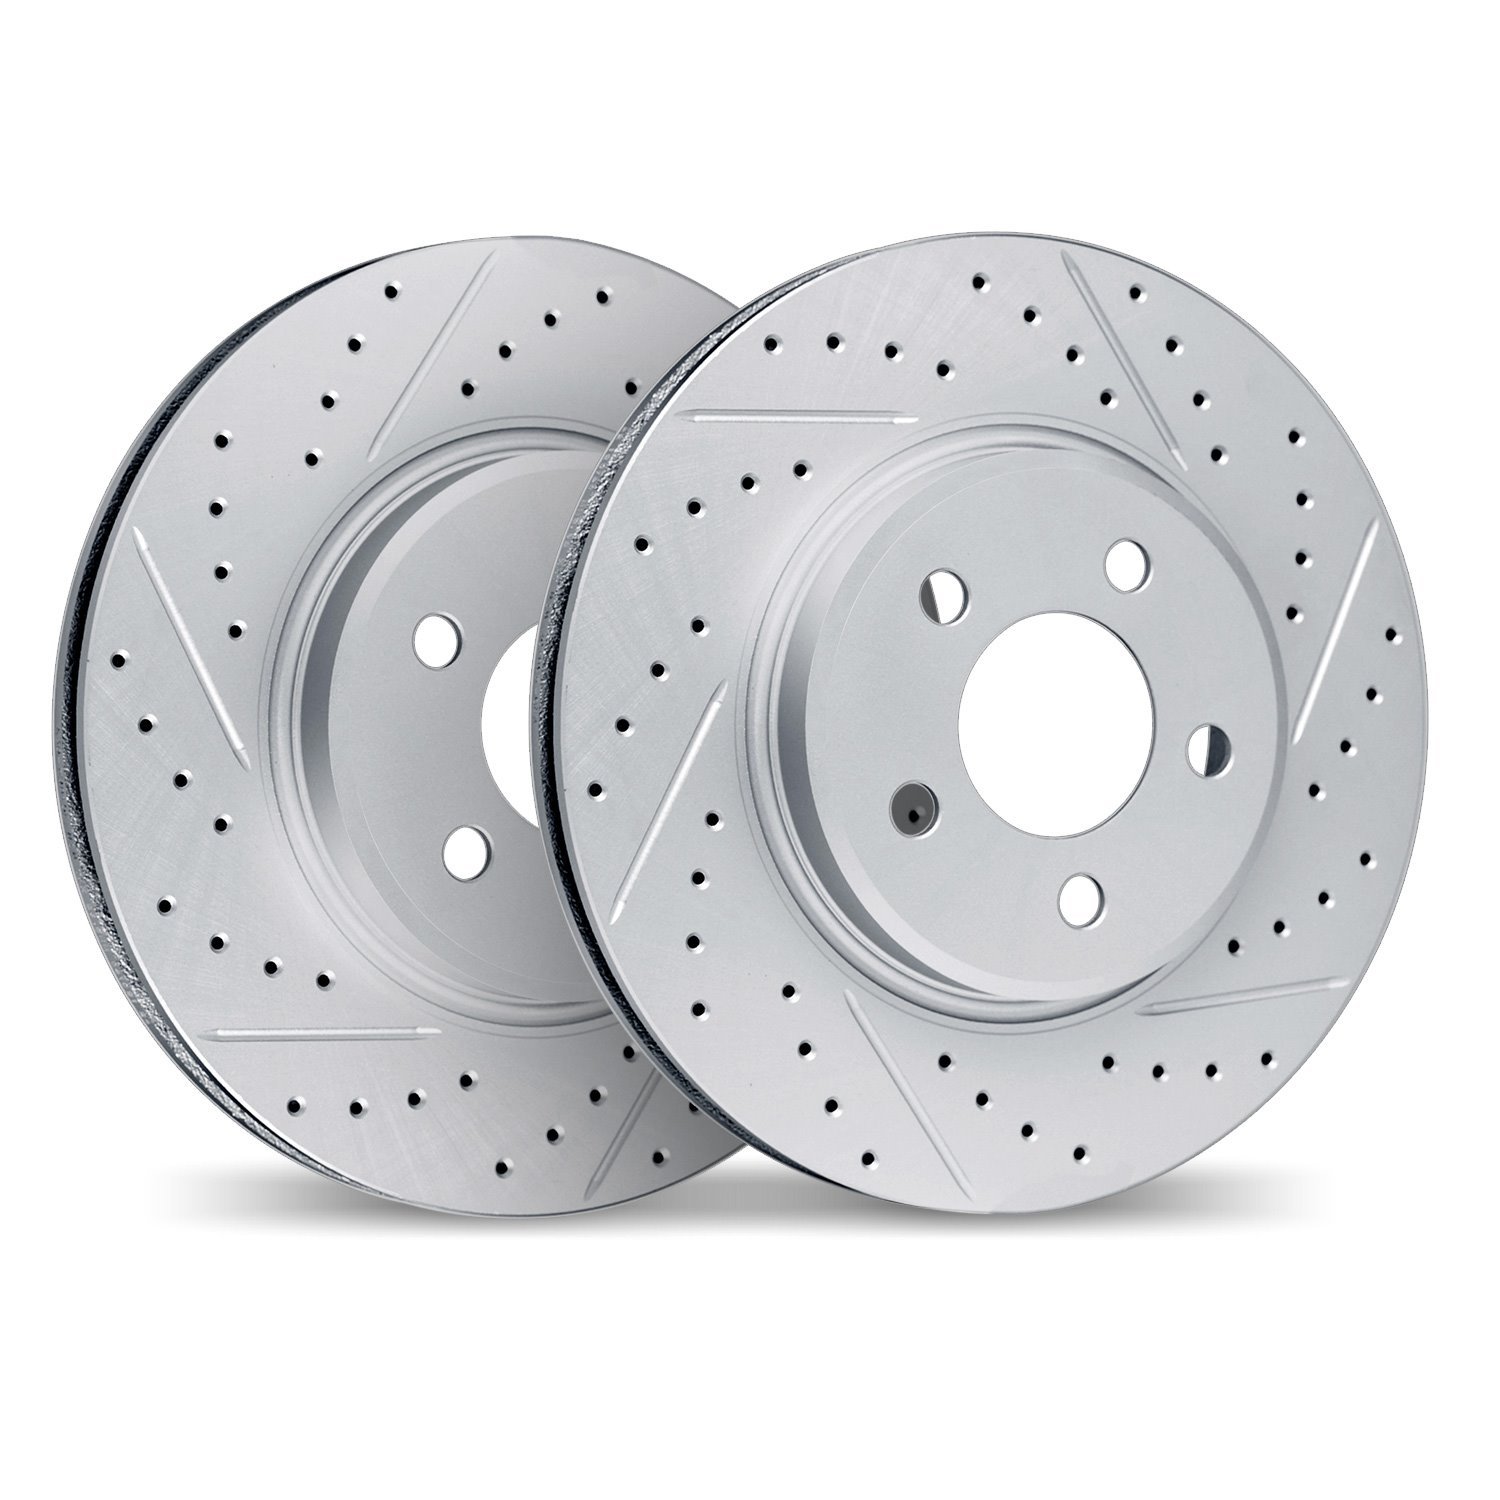 2002-31036 Geoperformance Drilled/Slotted Brake Rotors, 1988-1991 BMW, Position: Front